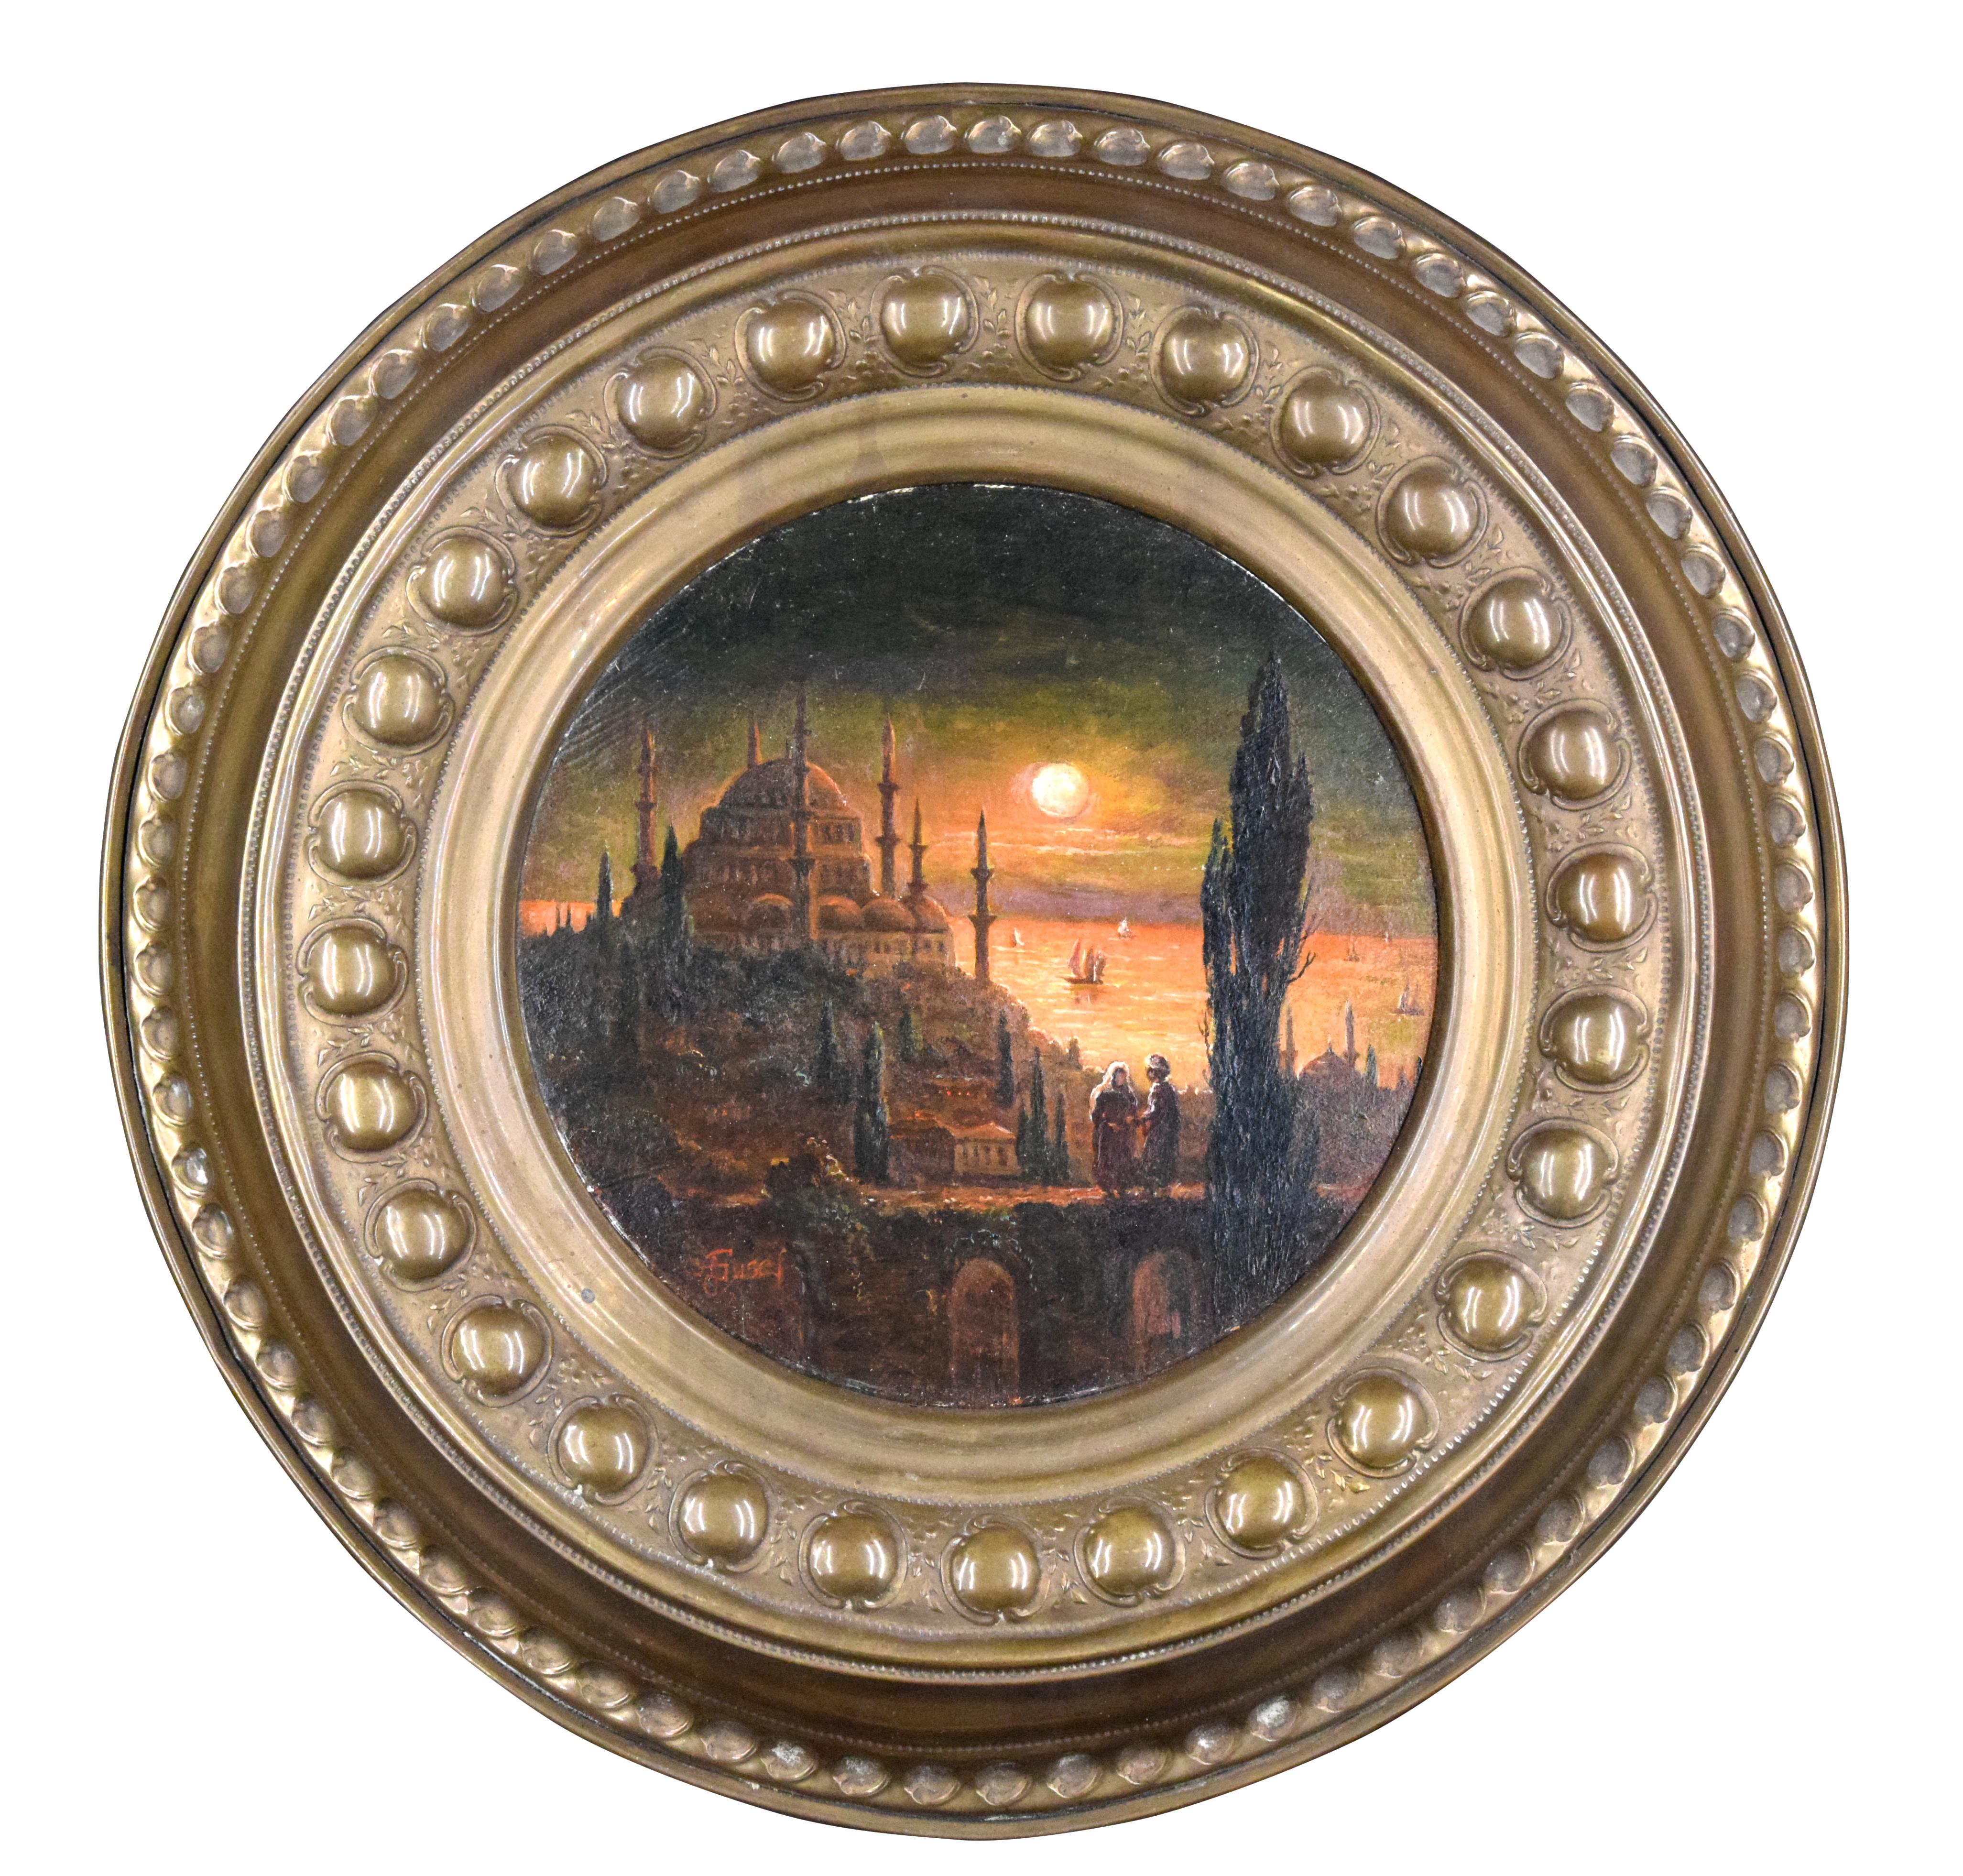 Unknown Figurative Painting - Round View of Constantinople - Original Oil on Wooden Panel 19th Century